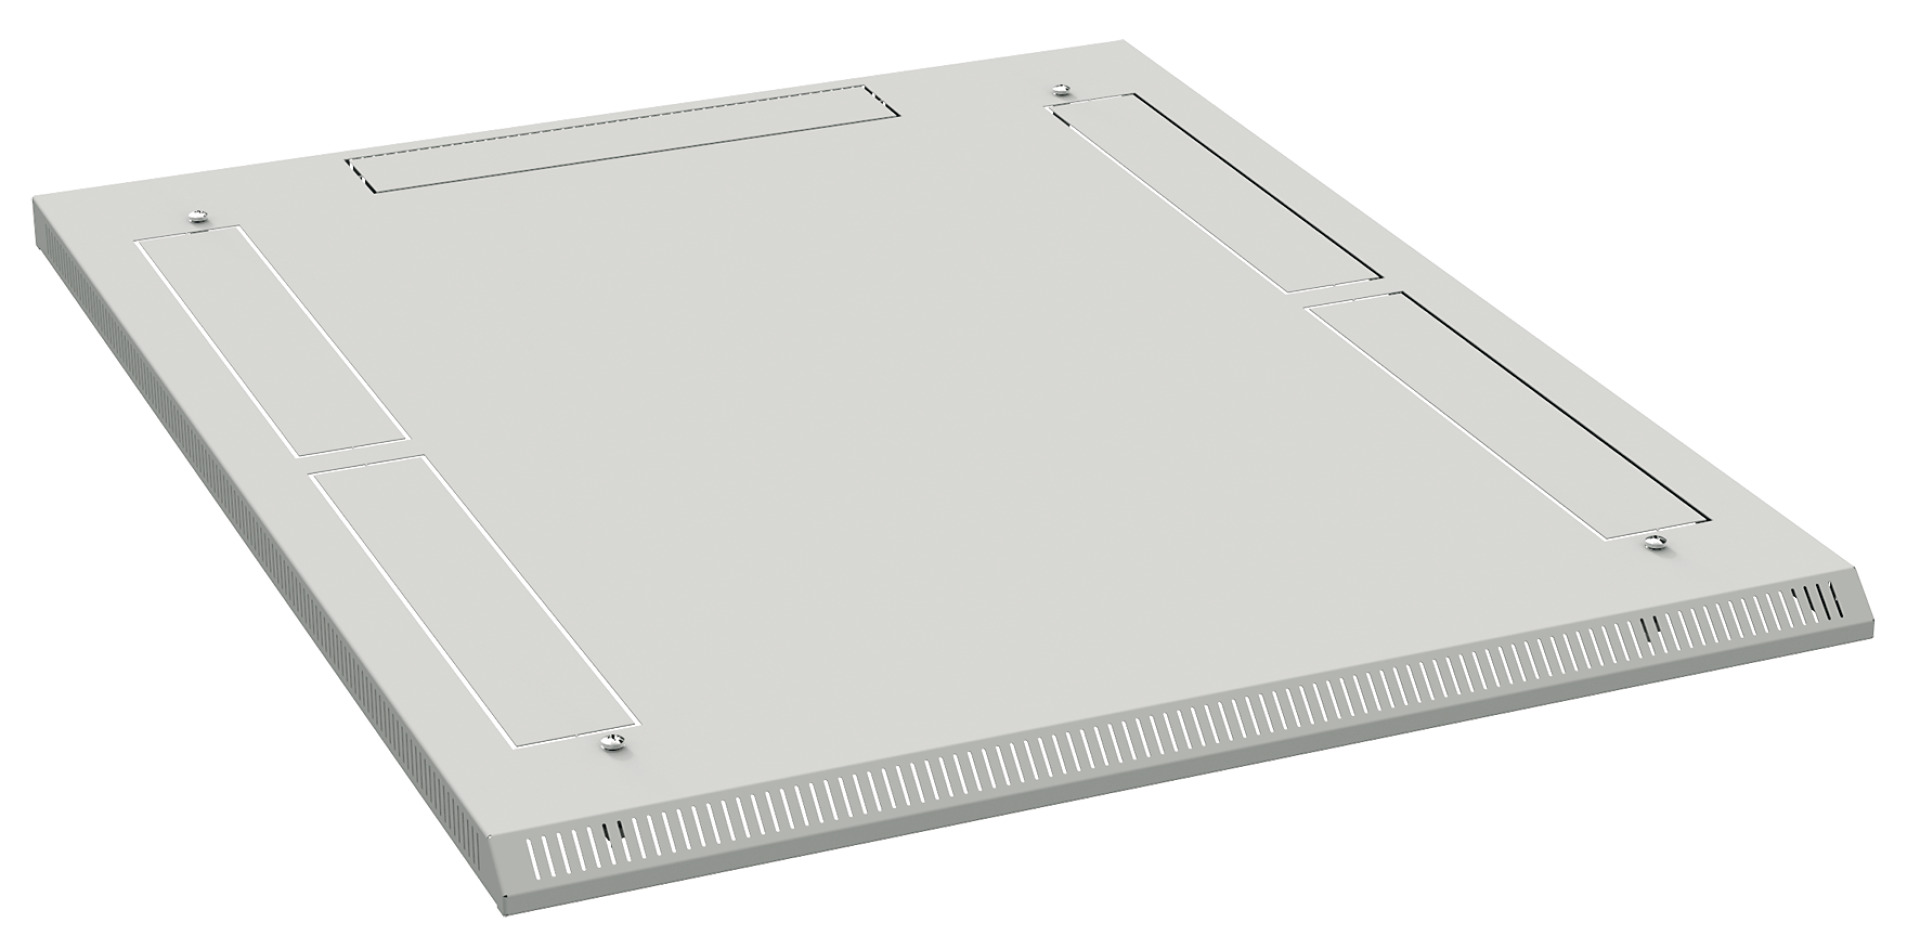 Additional Roof H=40 mm, 800x600 mm, RAL7035, for Cabinet Series PRO